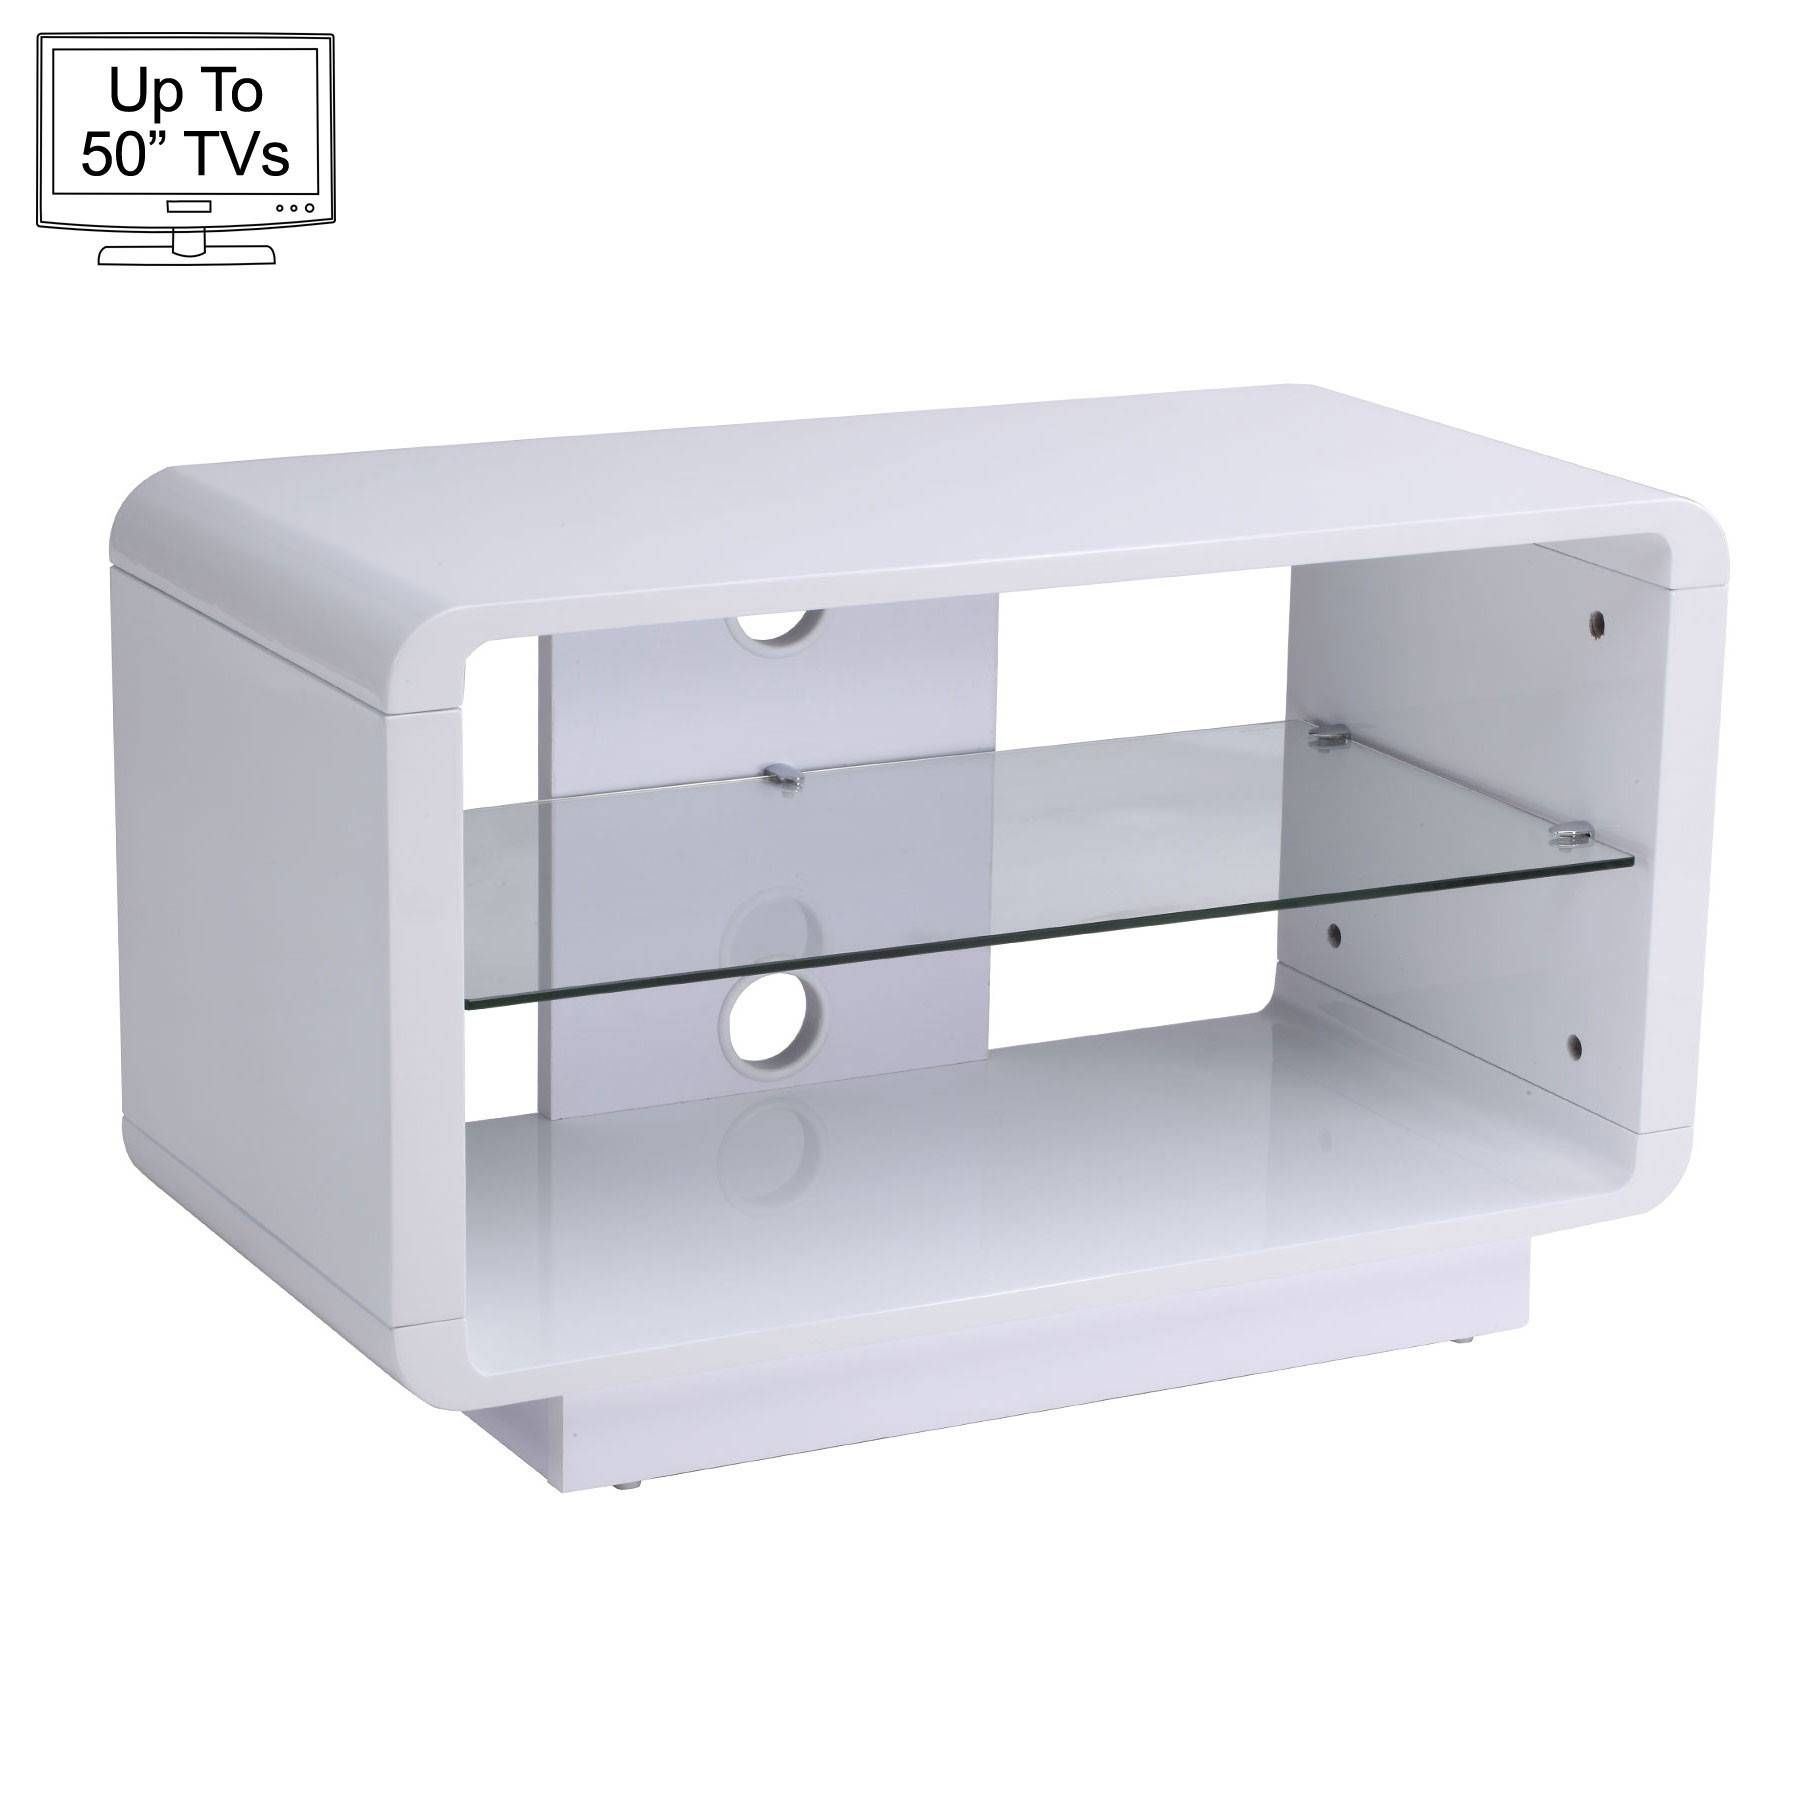 Luna 80cm White Tv Stand For Up To 50" Tvs Intended For White Tv Cabinets (View 13 of 15)